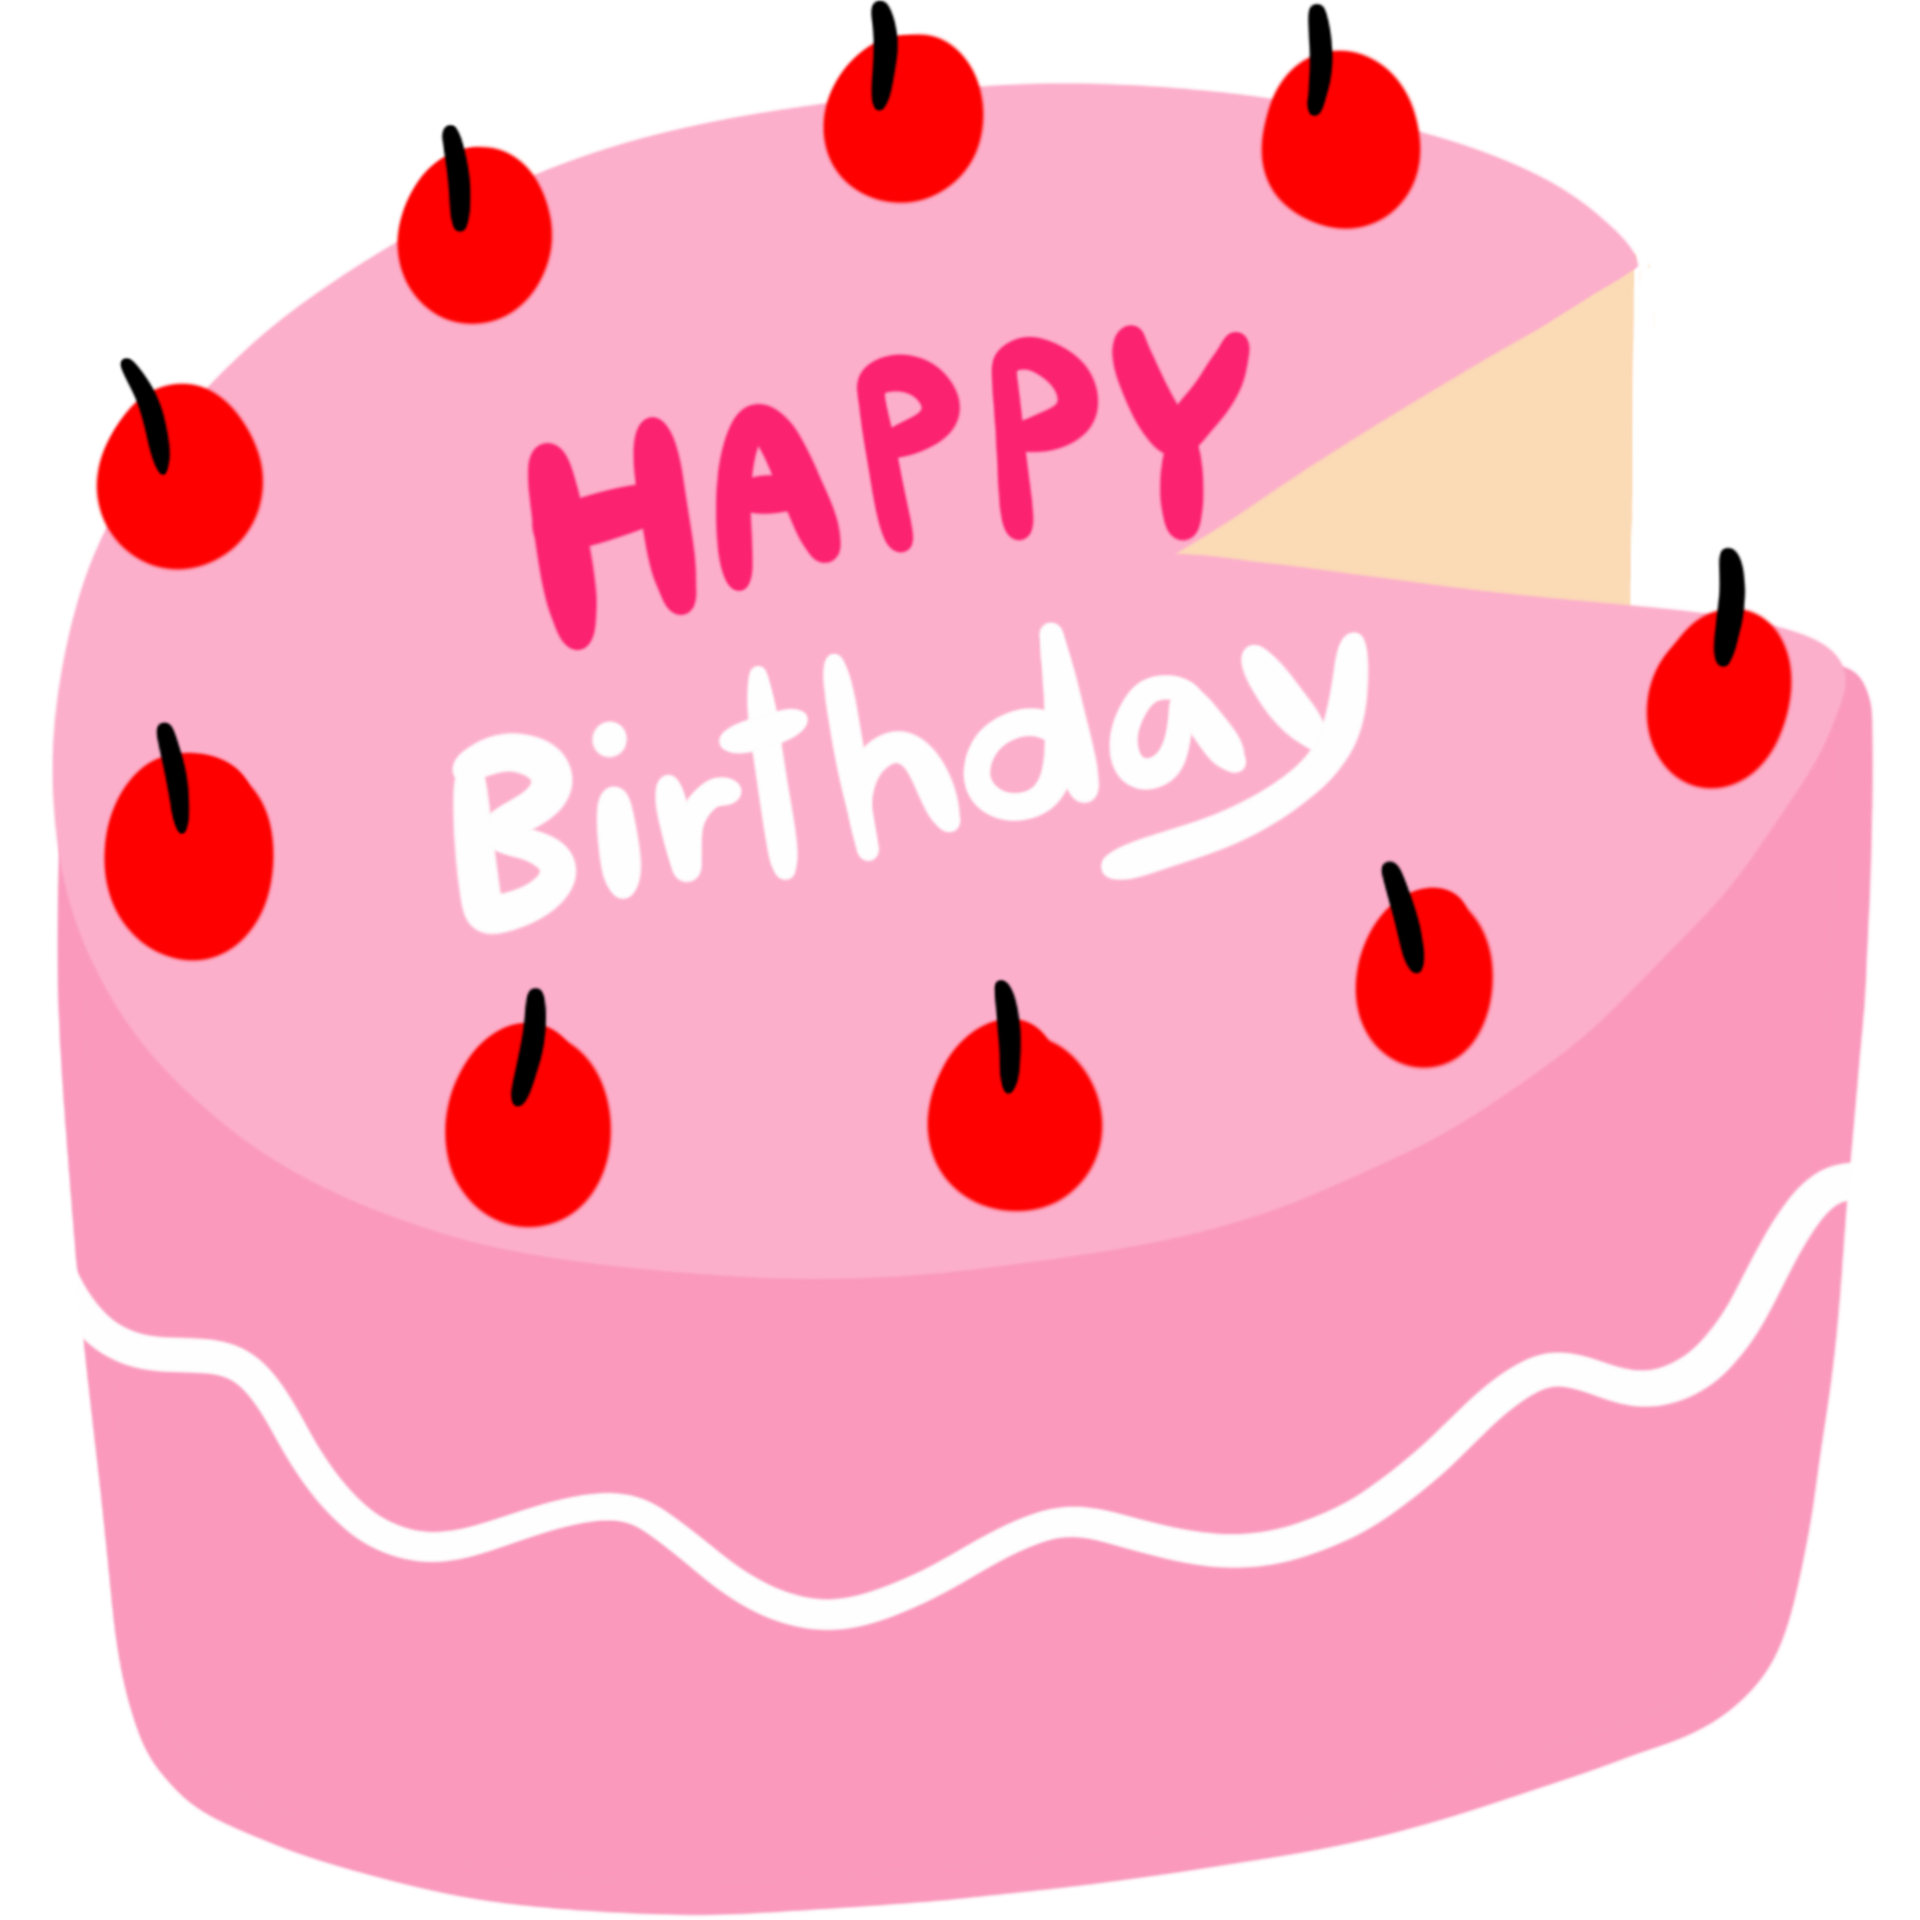 birthday cake candles cake | Birthday cake with candles and … | Flickr